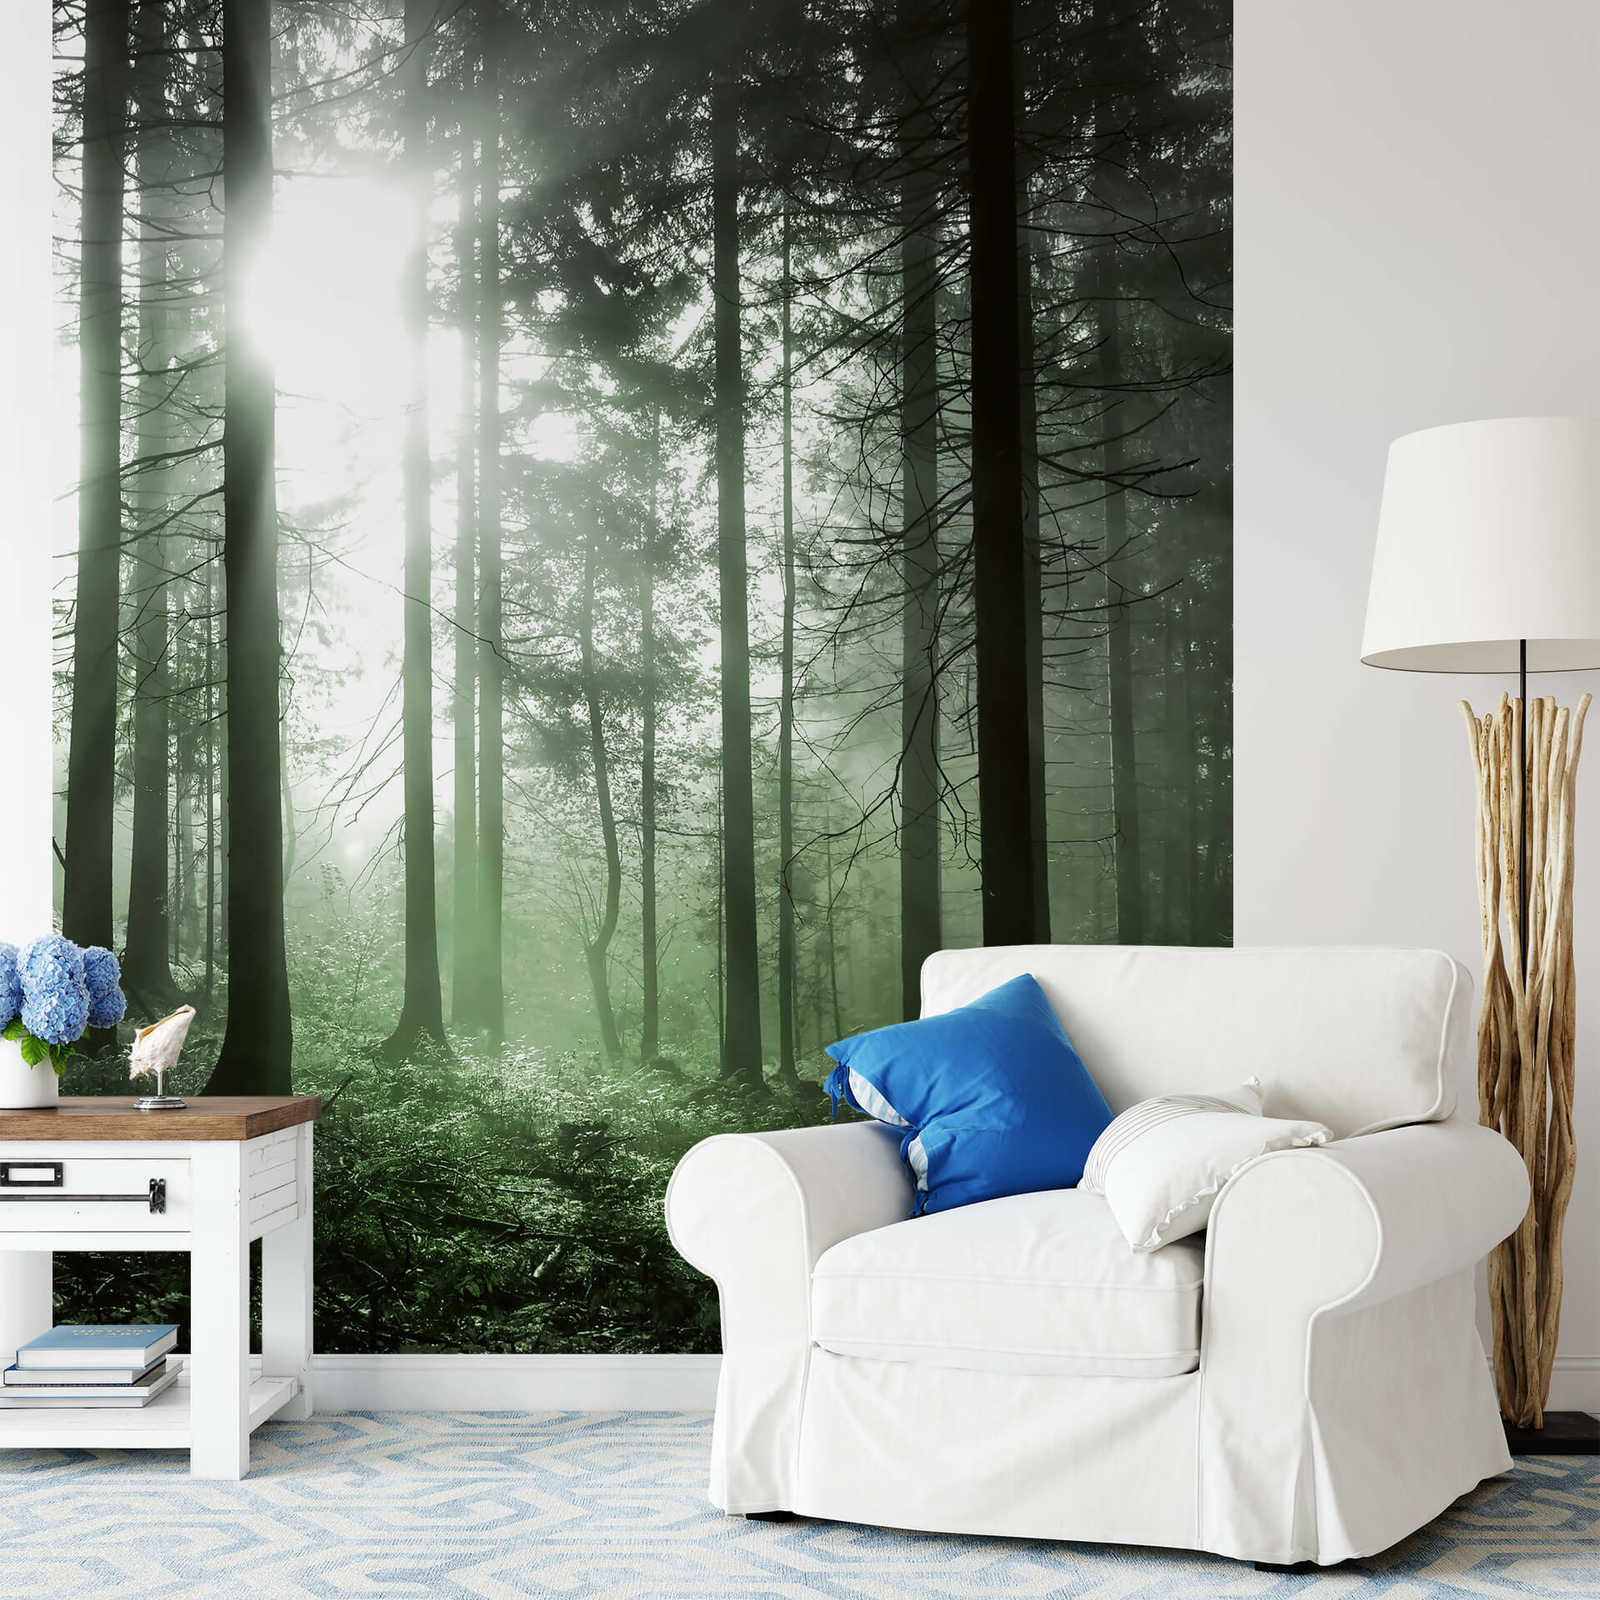             Photo wallpaper sunbeams in the forest - green, black, white
        